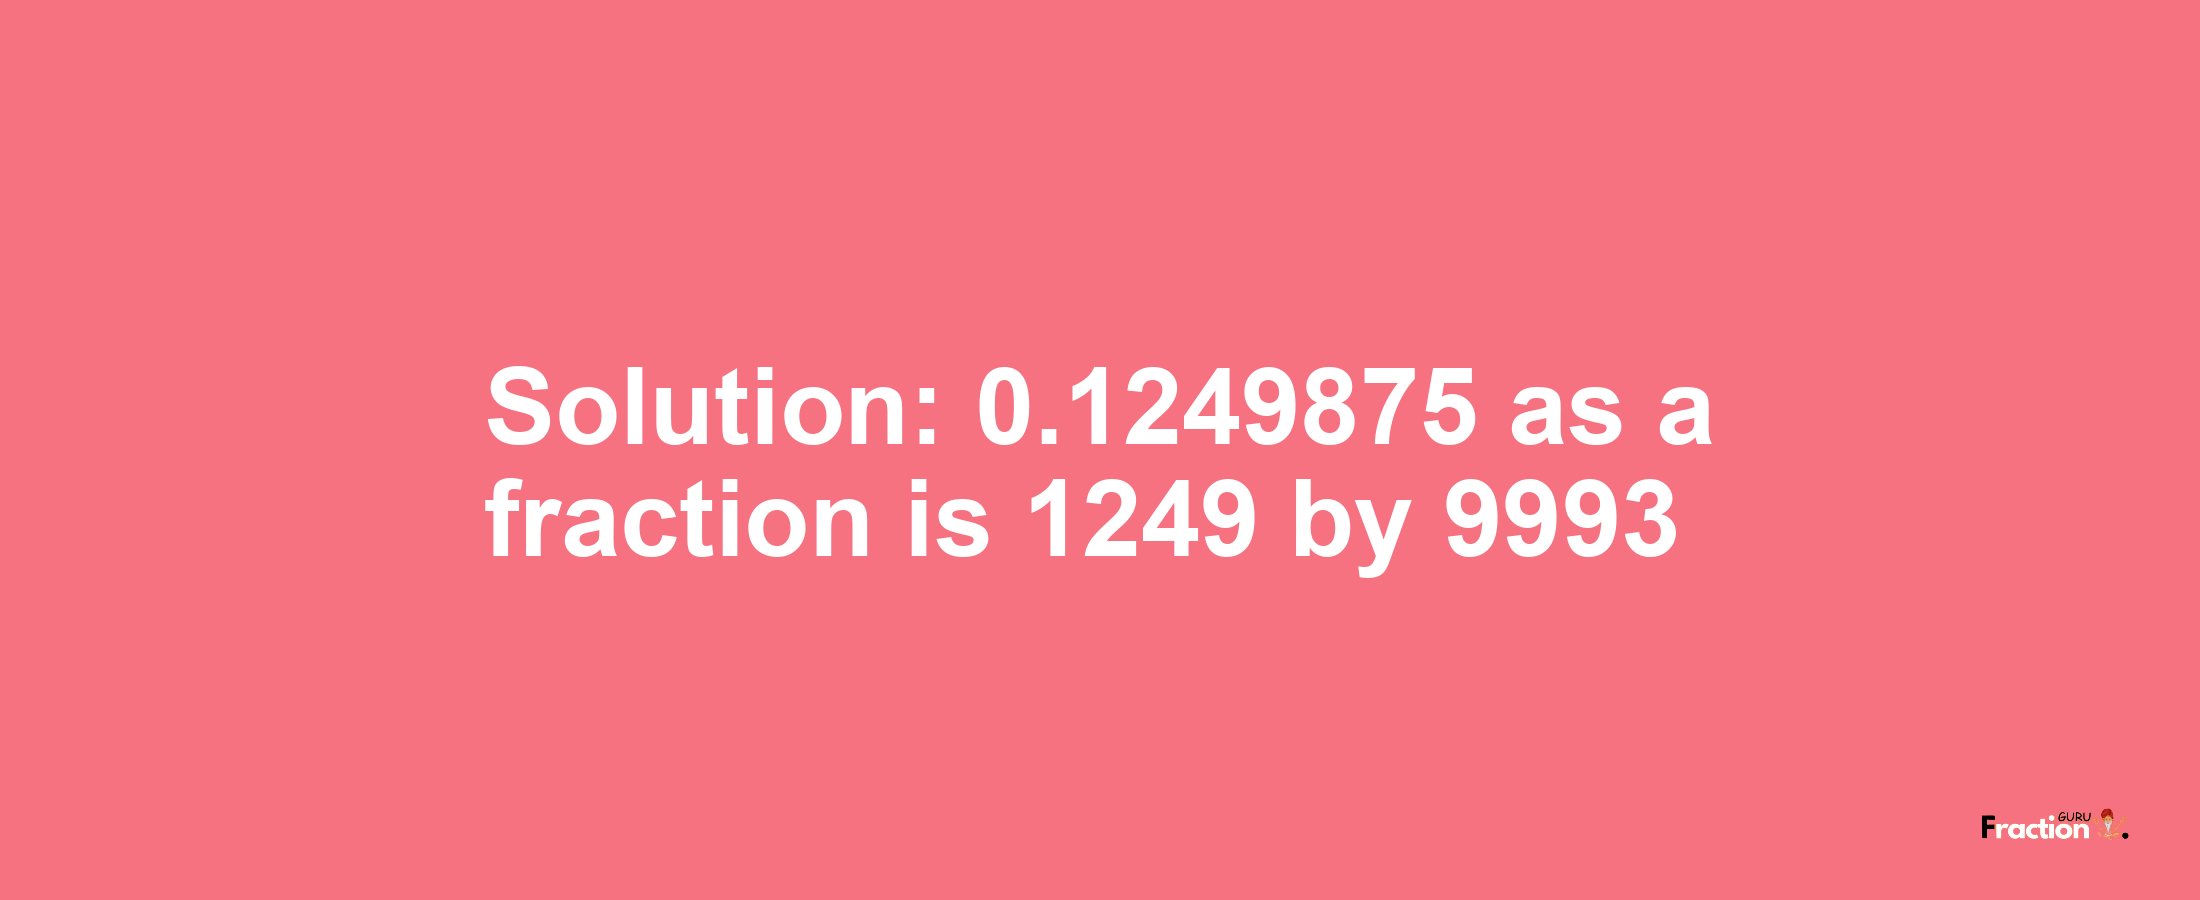 Solution:0.1249875 as a fraction is 1249/9993